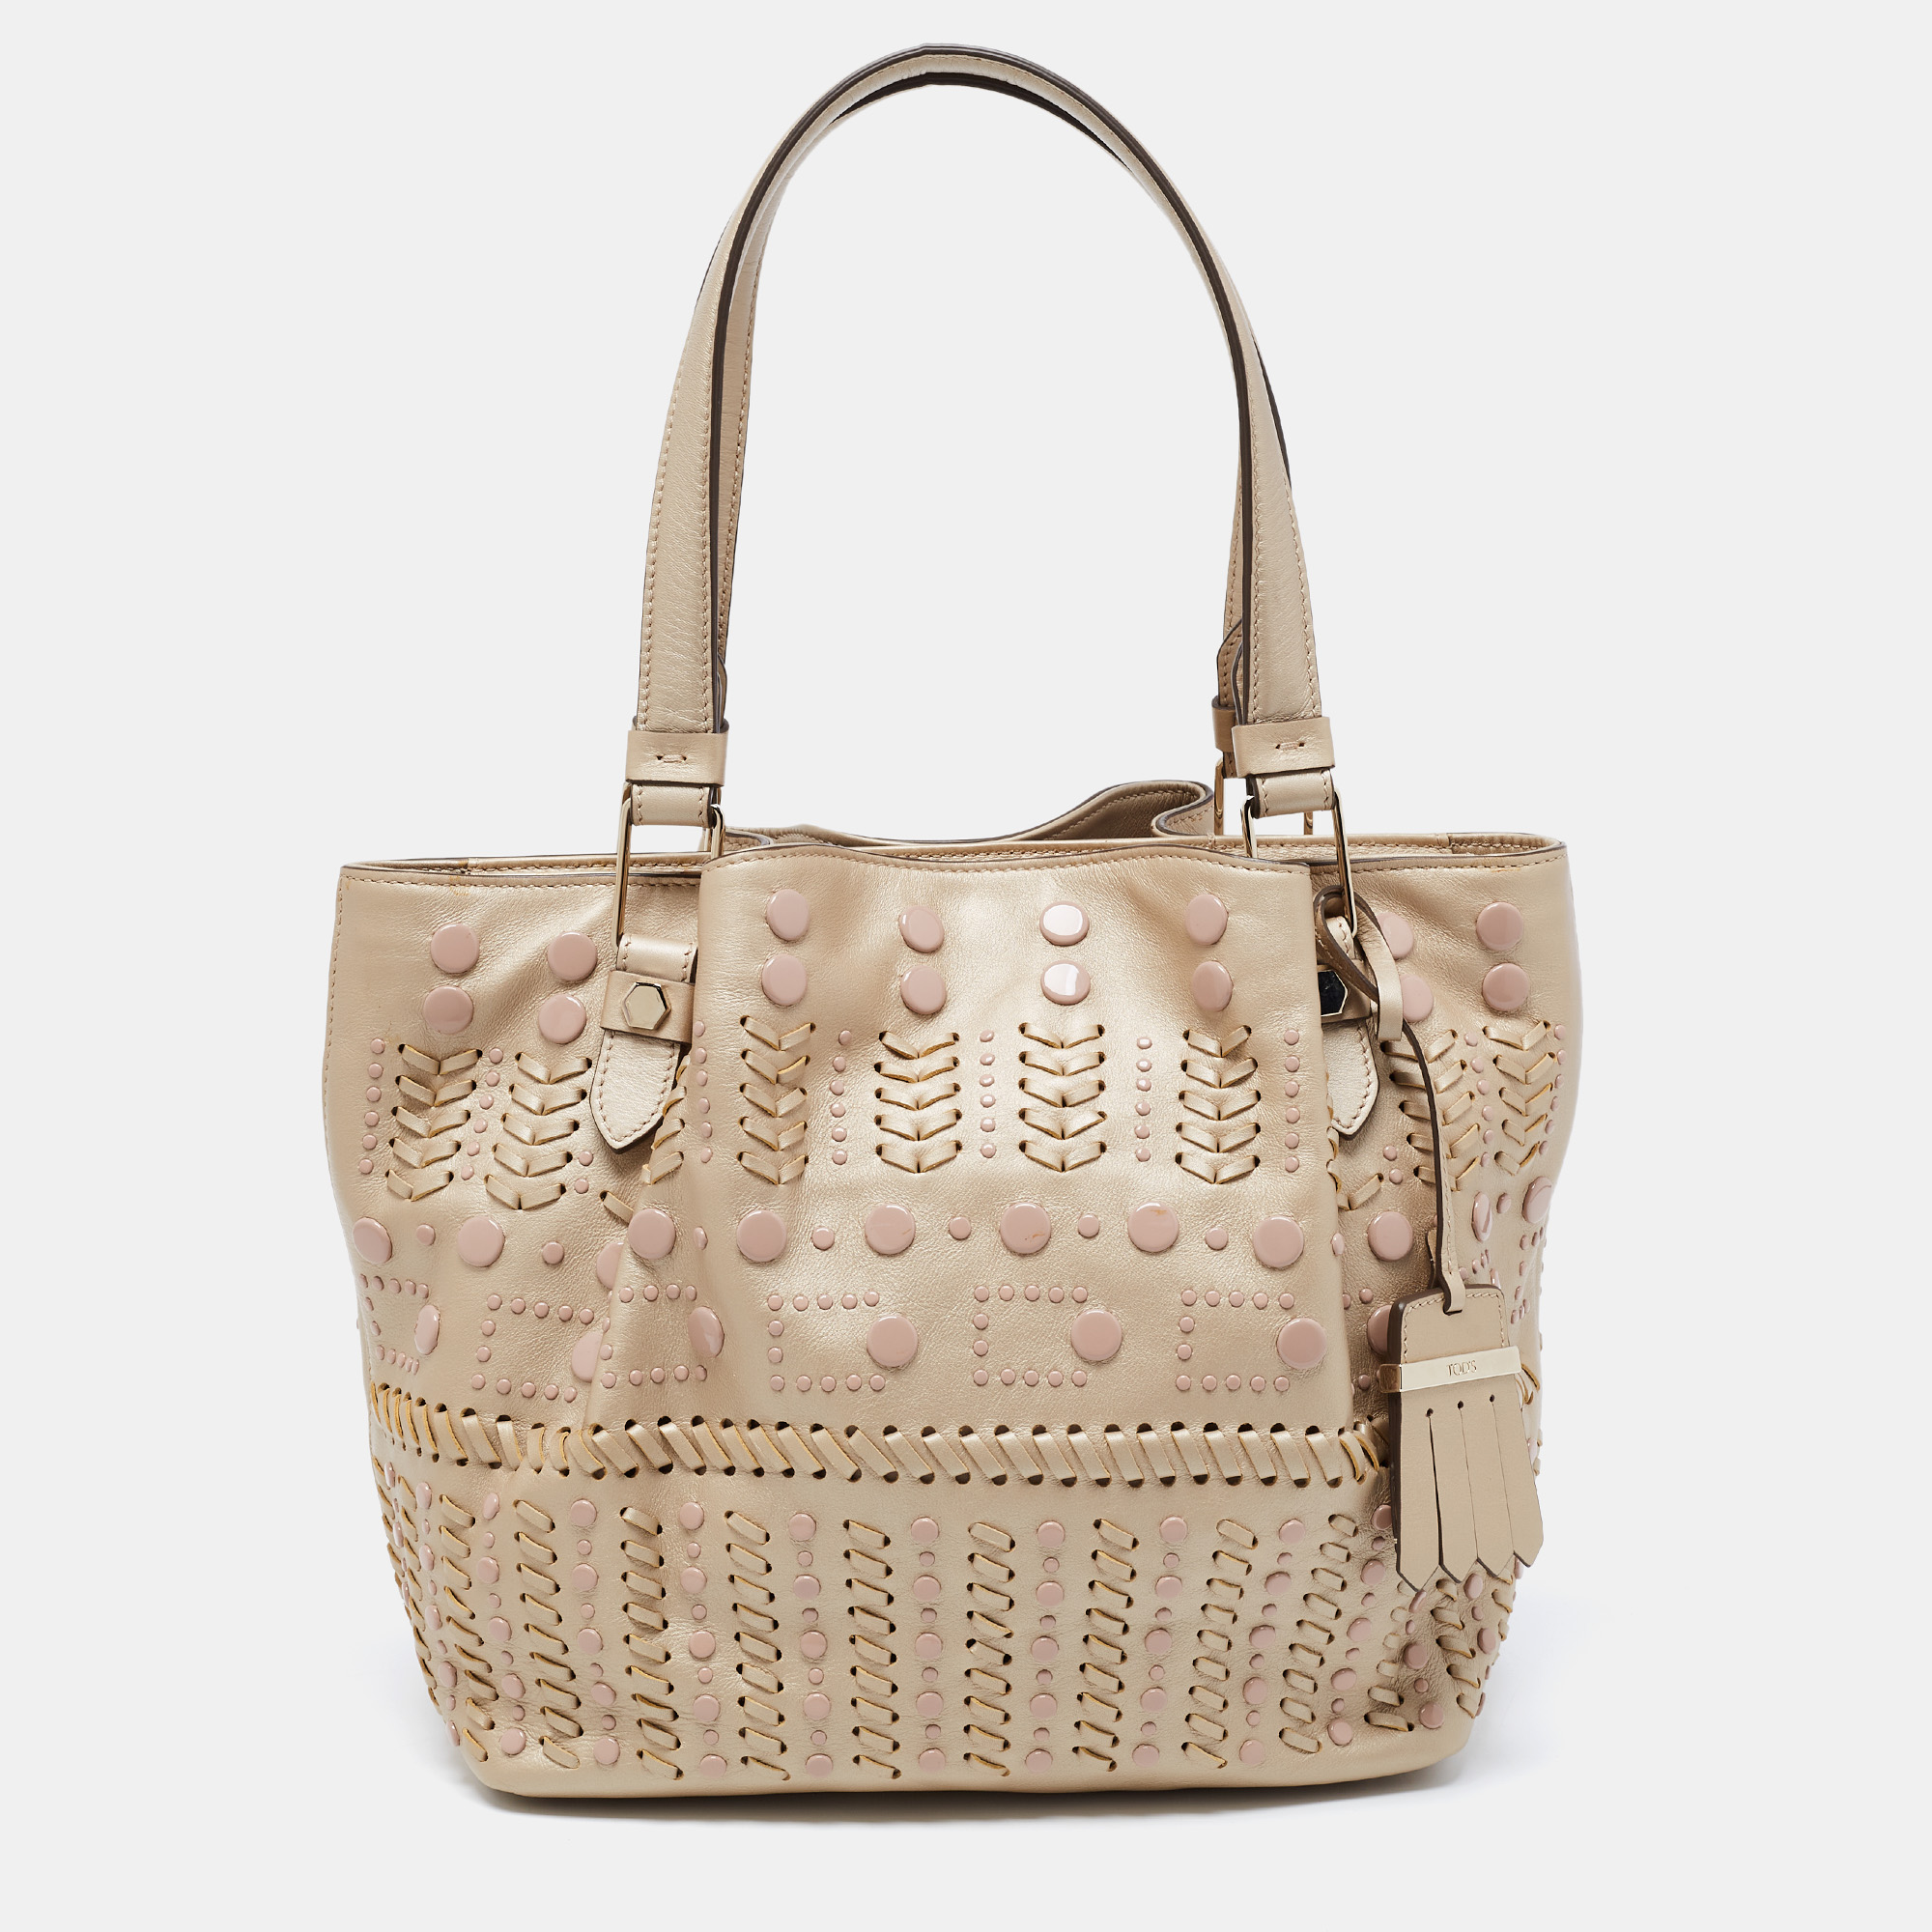 Tods delivers a beautifully made tote in beige leather to assist you to lunch or shopping. This lovely tote is decorated with studs and sized spaciously for neatly housing your belongings. Two handles on top allow easy carrying options.